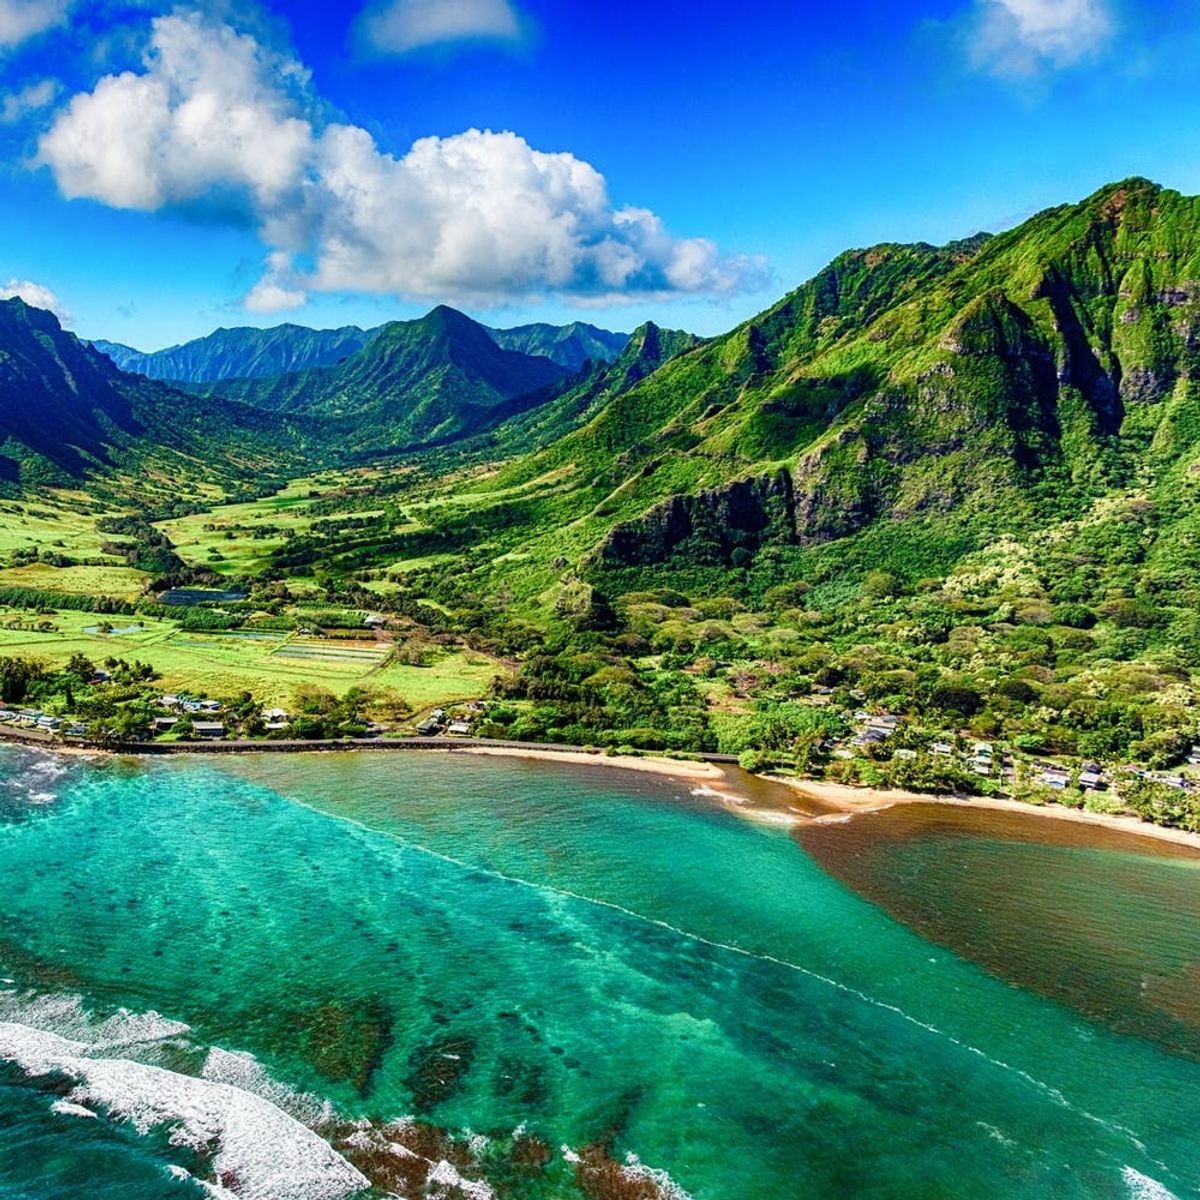 Southwest Airlines Just Made It Easier (and Cheaper) Than Ever to Go to Hawaii